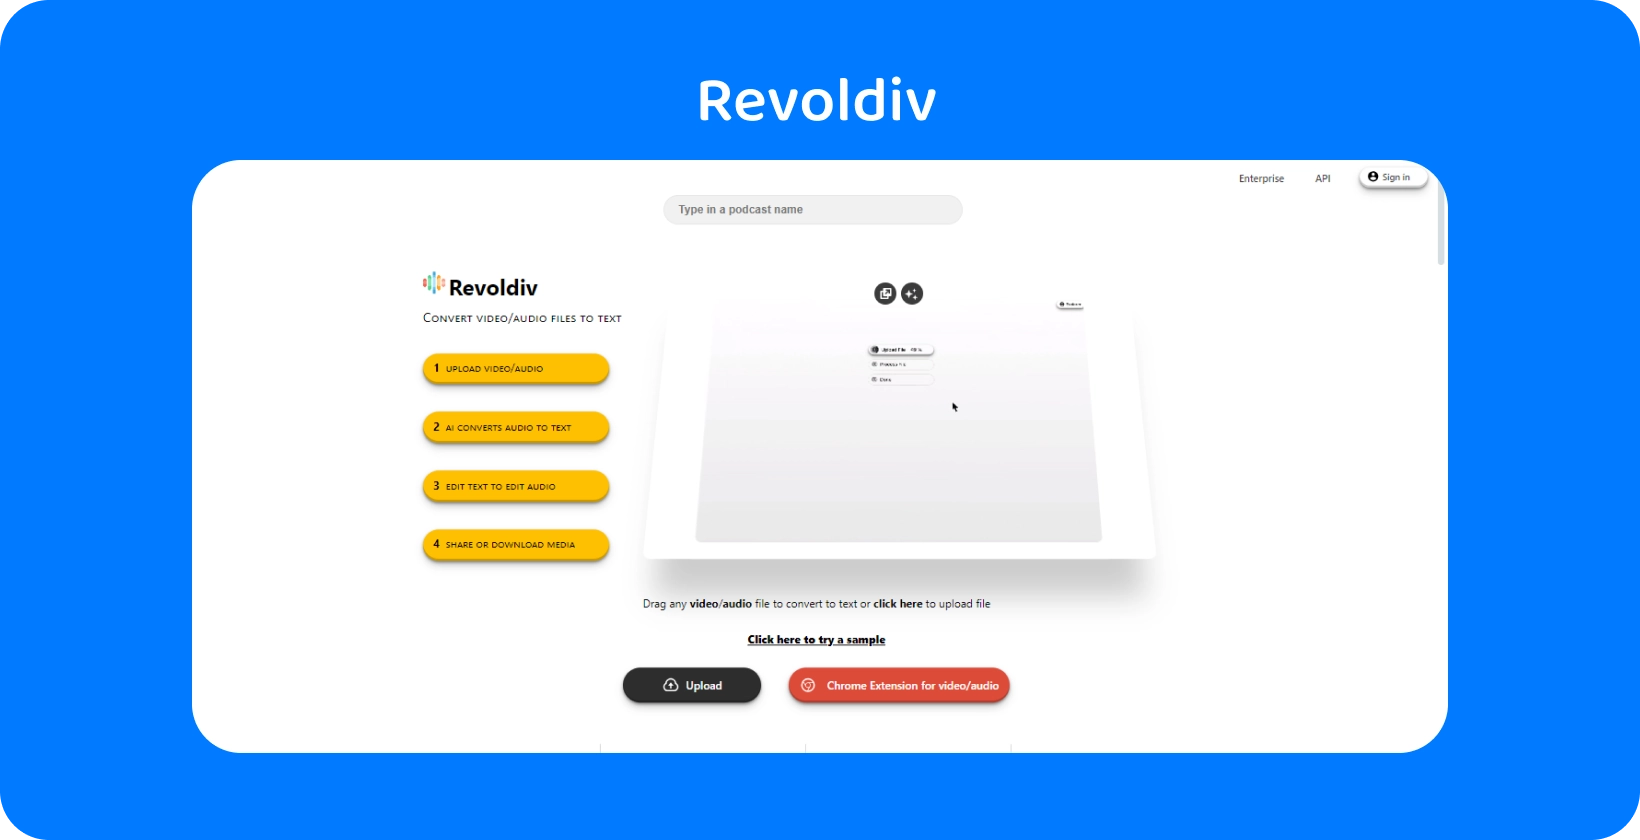 Revoldiv's sleek web interface ready for audio uploads and conversion to text, showcasing simplicity and efficiency.